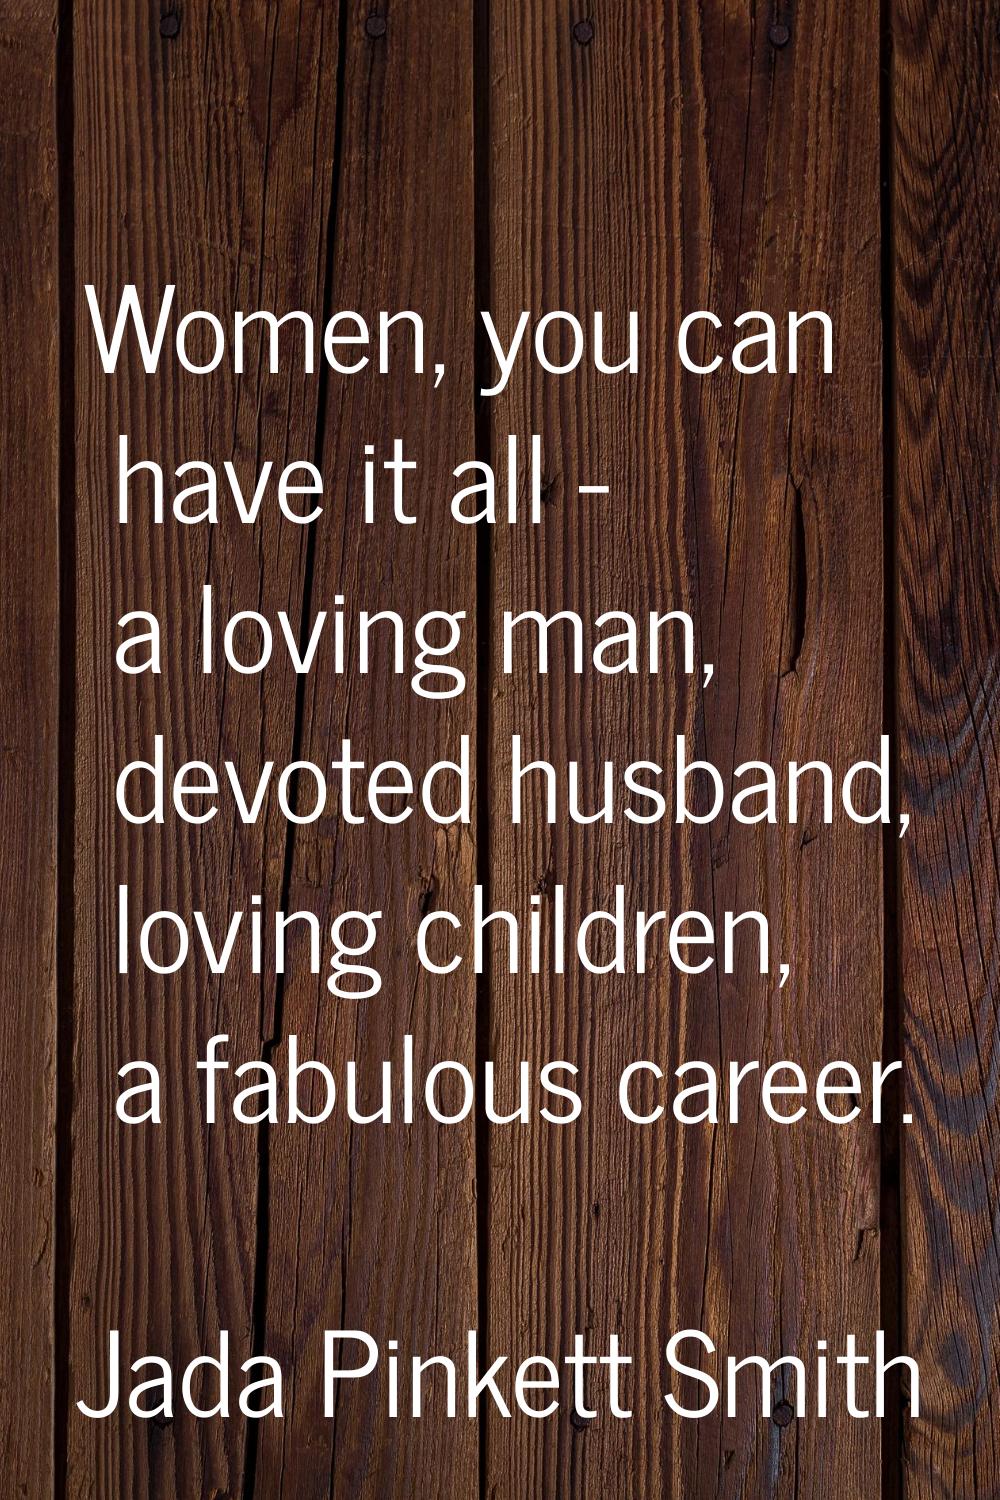 Women, you can have it all - a loving man, devoted husband, loving children, a fabulous career.